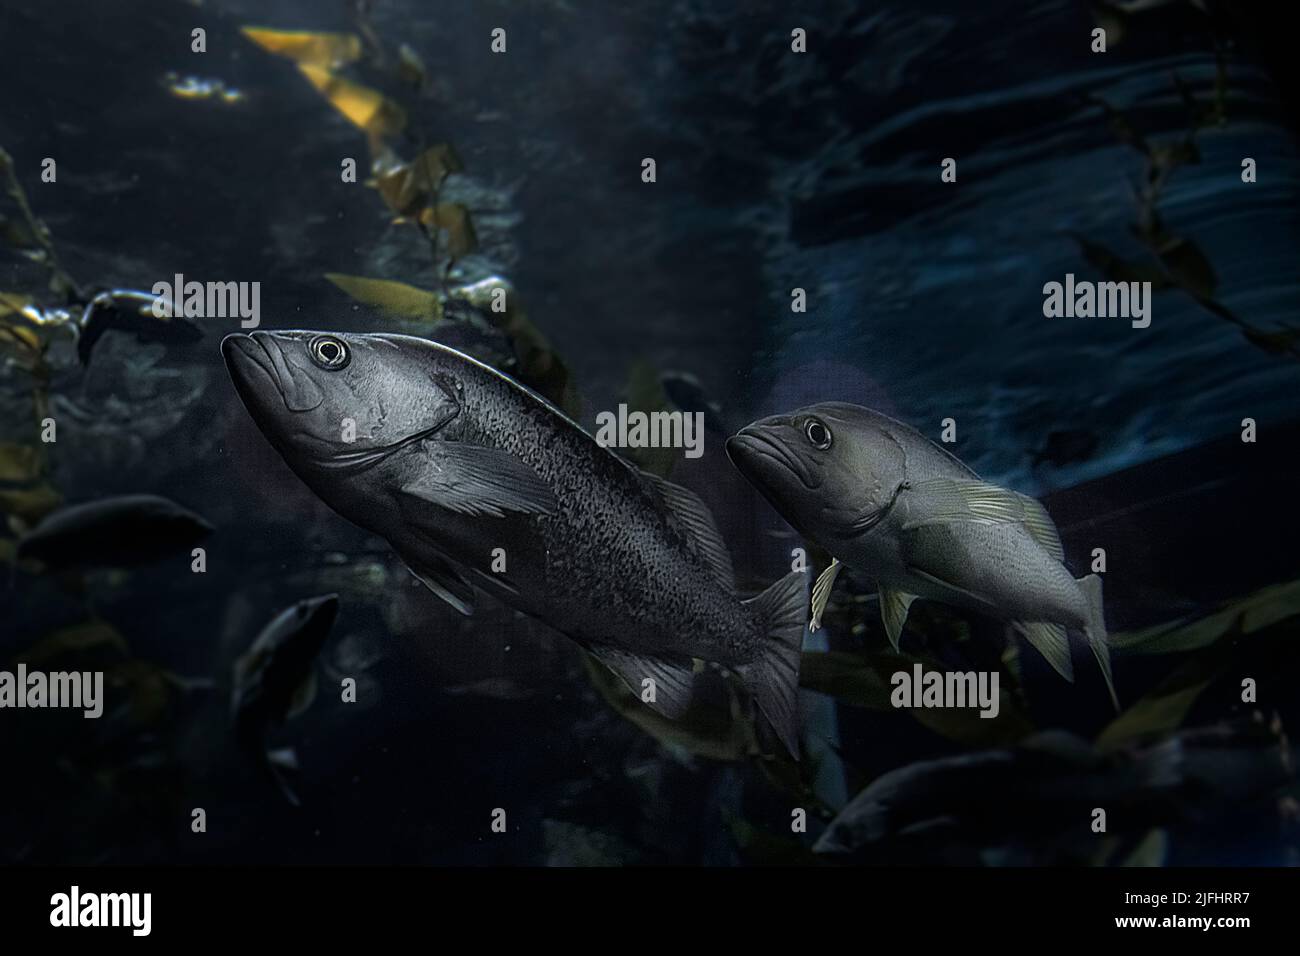 A close-up underwater view of the Black rockfishes swimming Stock Photo